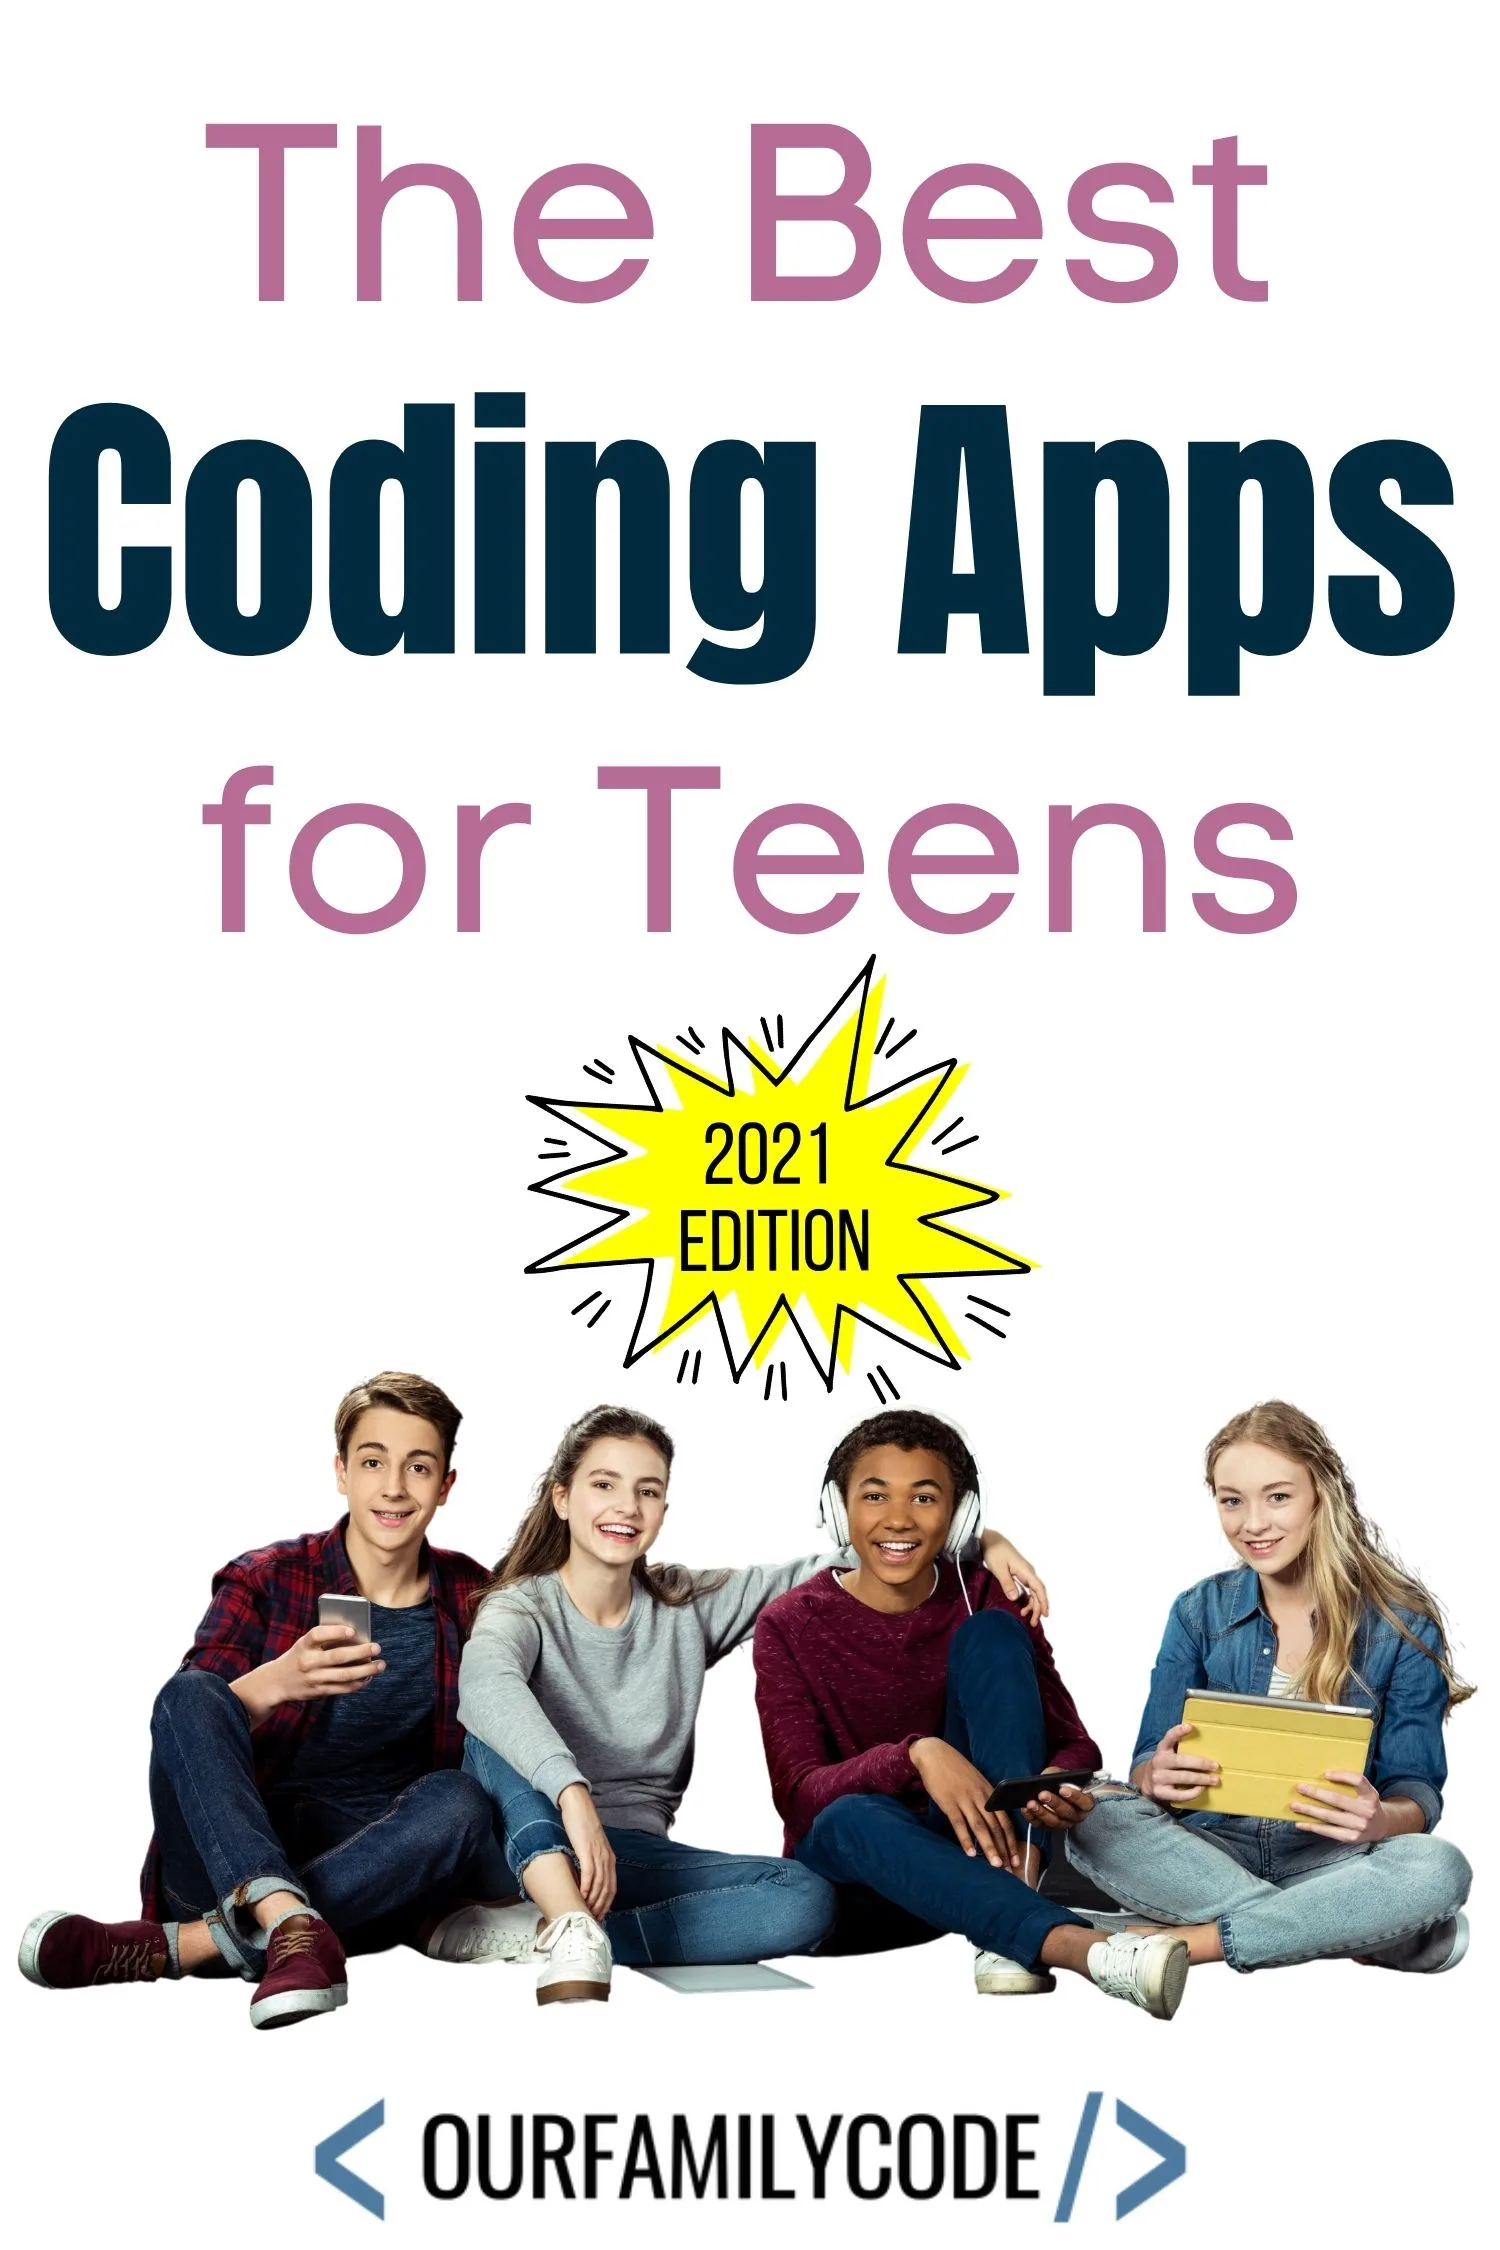 A picture of the best coding apps for teens written over teens sitting on devices.